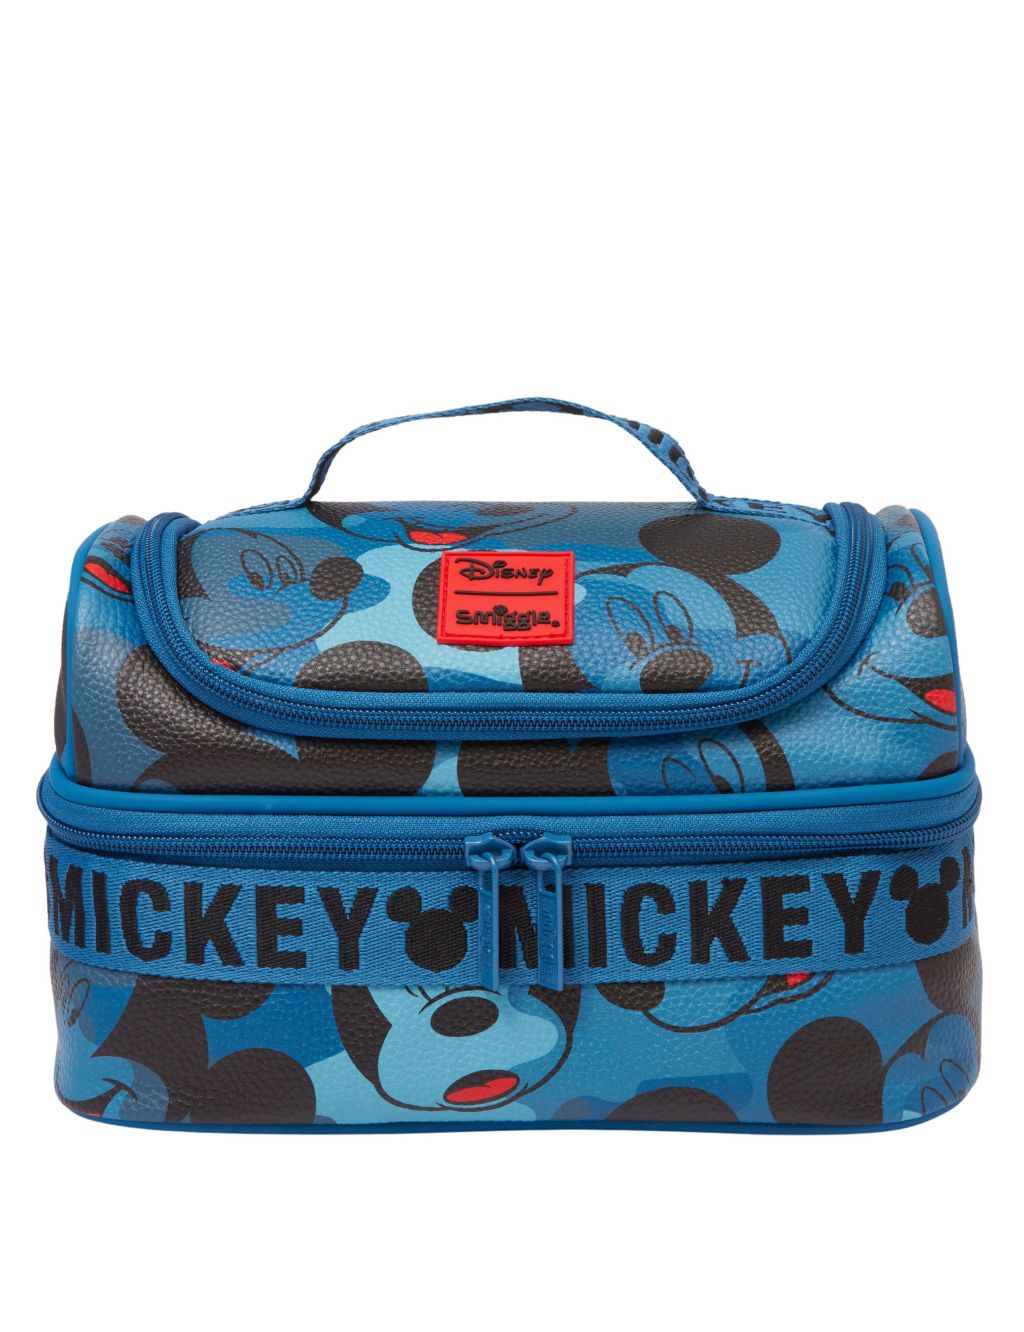 Kids' Mickey Mouse™ Lunch Box image 1